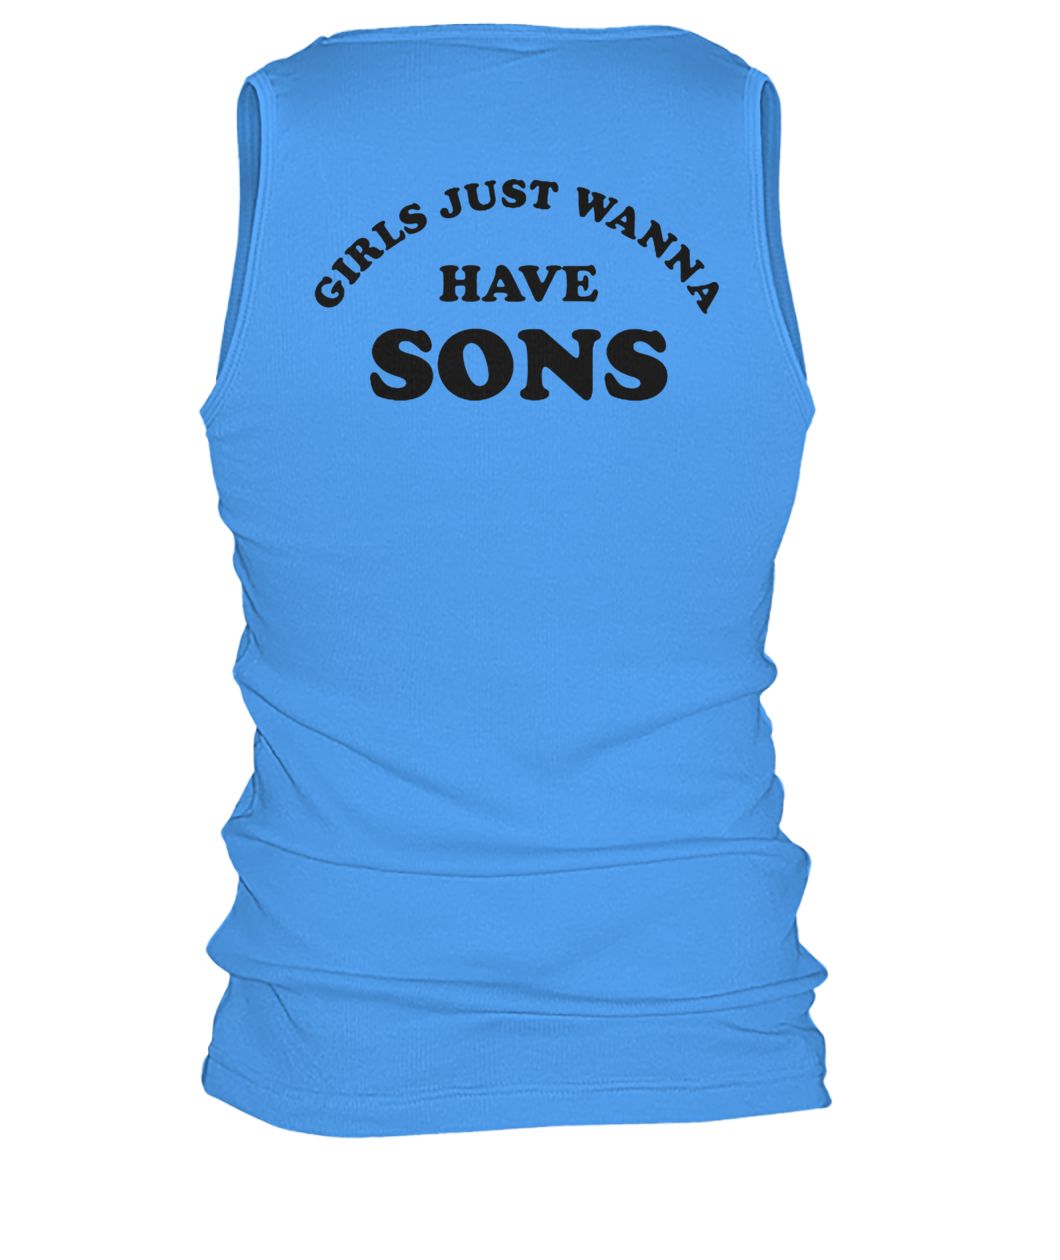 Girls just wanna have sons men's tank top